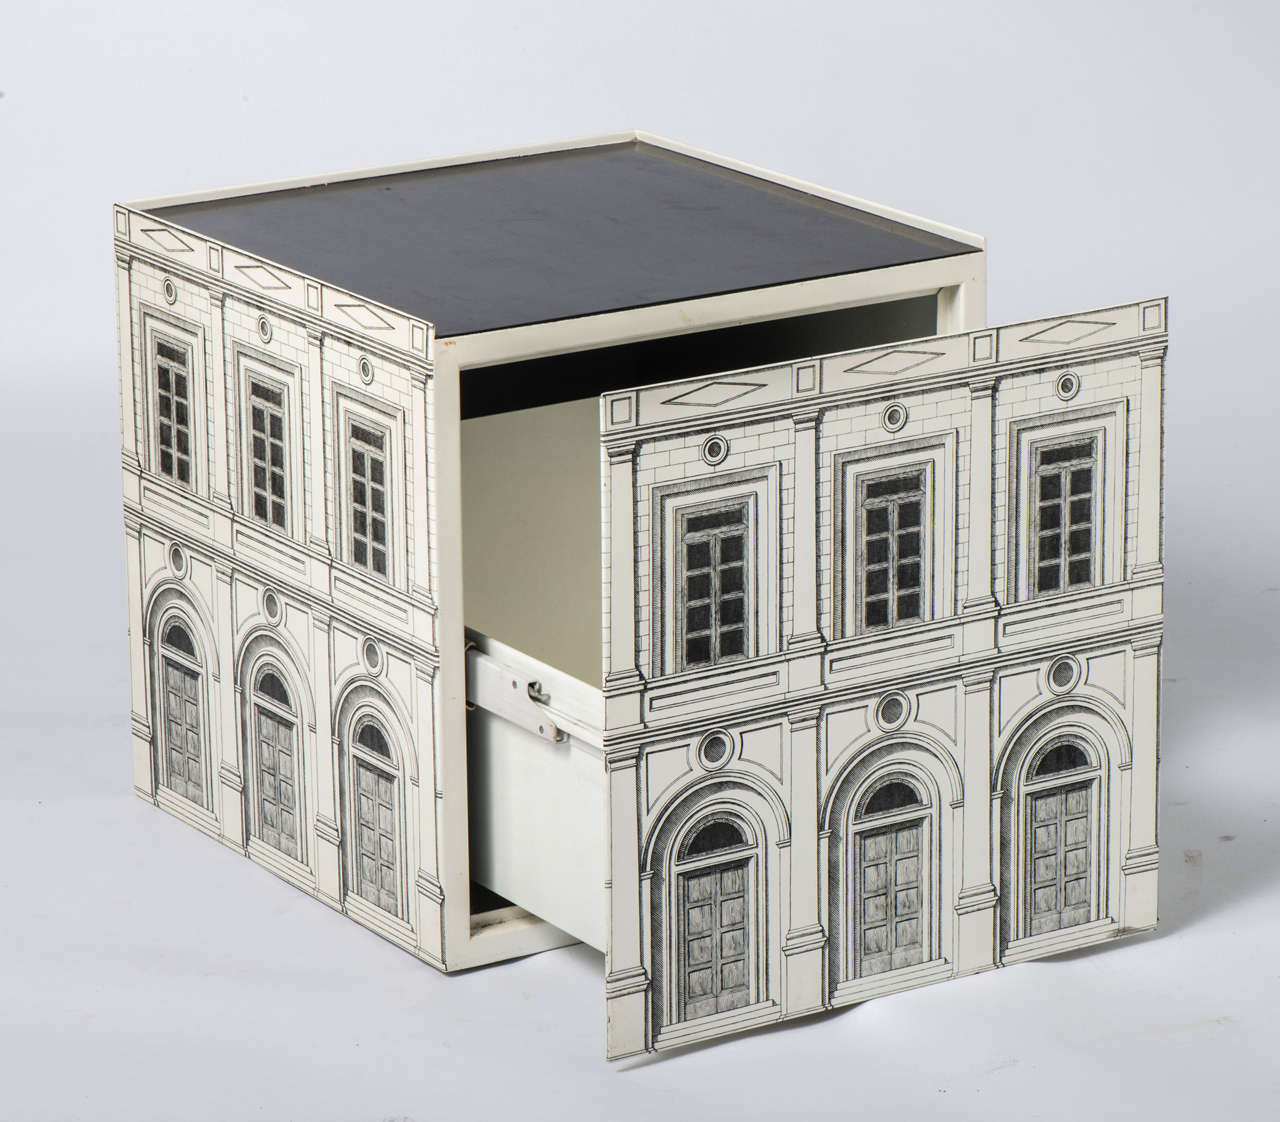 An Atelier Fornasetti Cube “Architettura” occasional table.
With single hidden drawer.
Lithographically printed metal.
Labelled to inside.
Italy, 1988-1989.